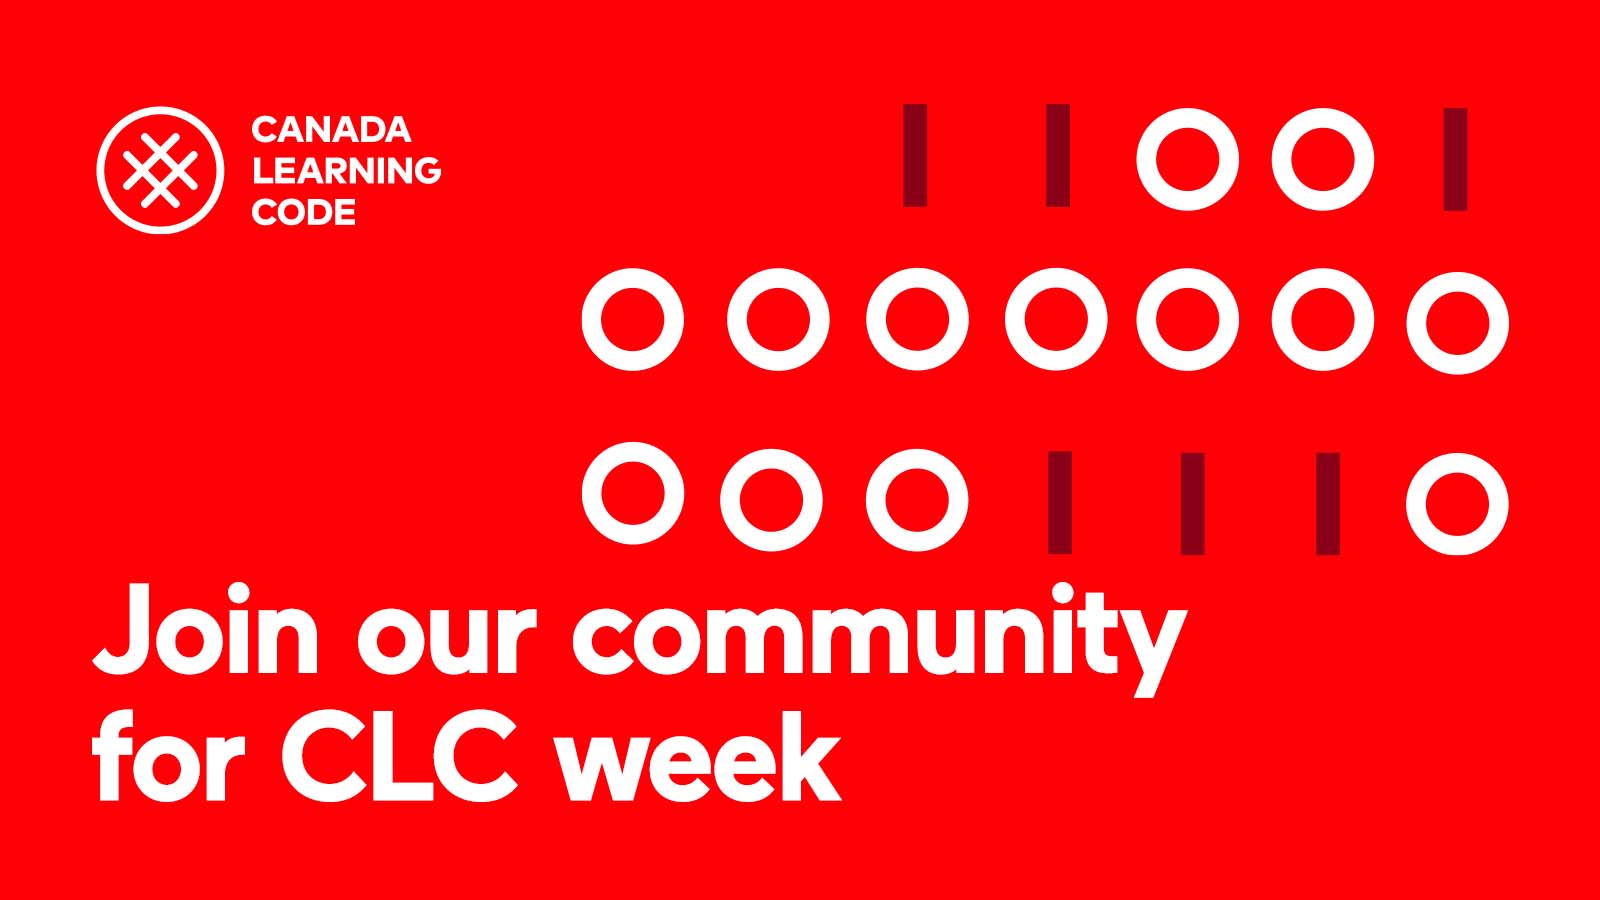 Join our community for CLC week